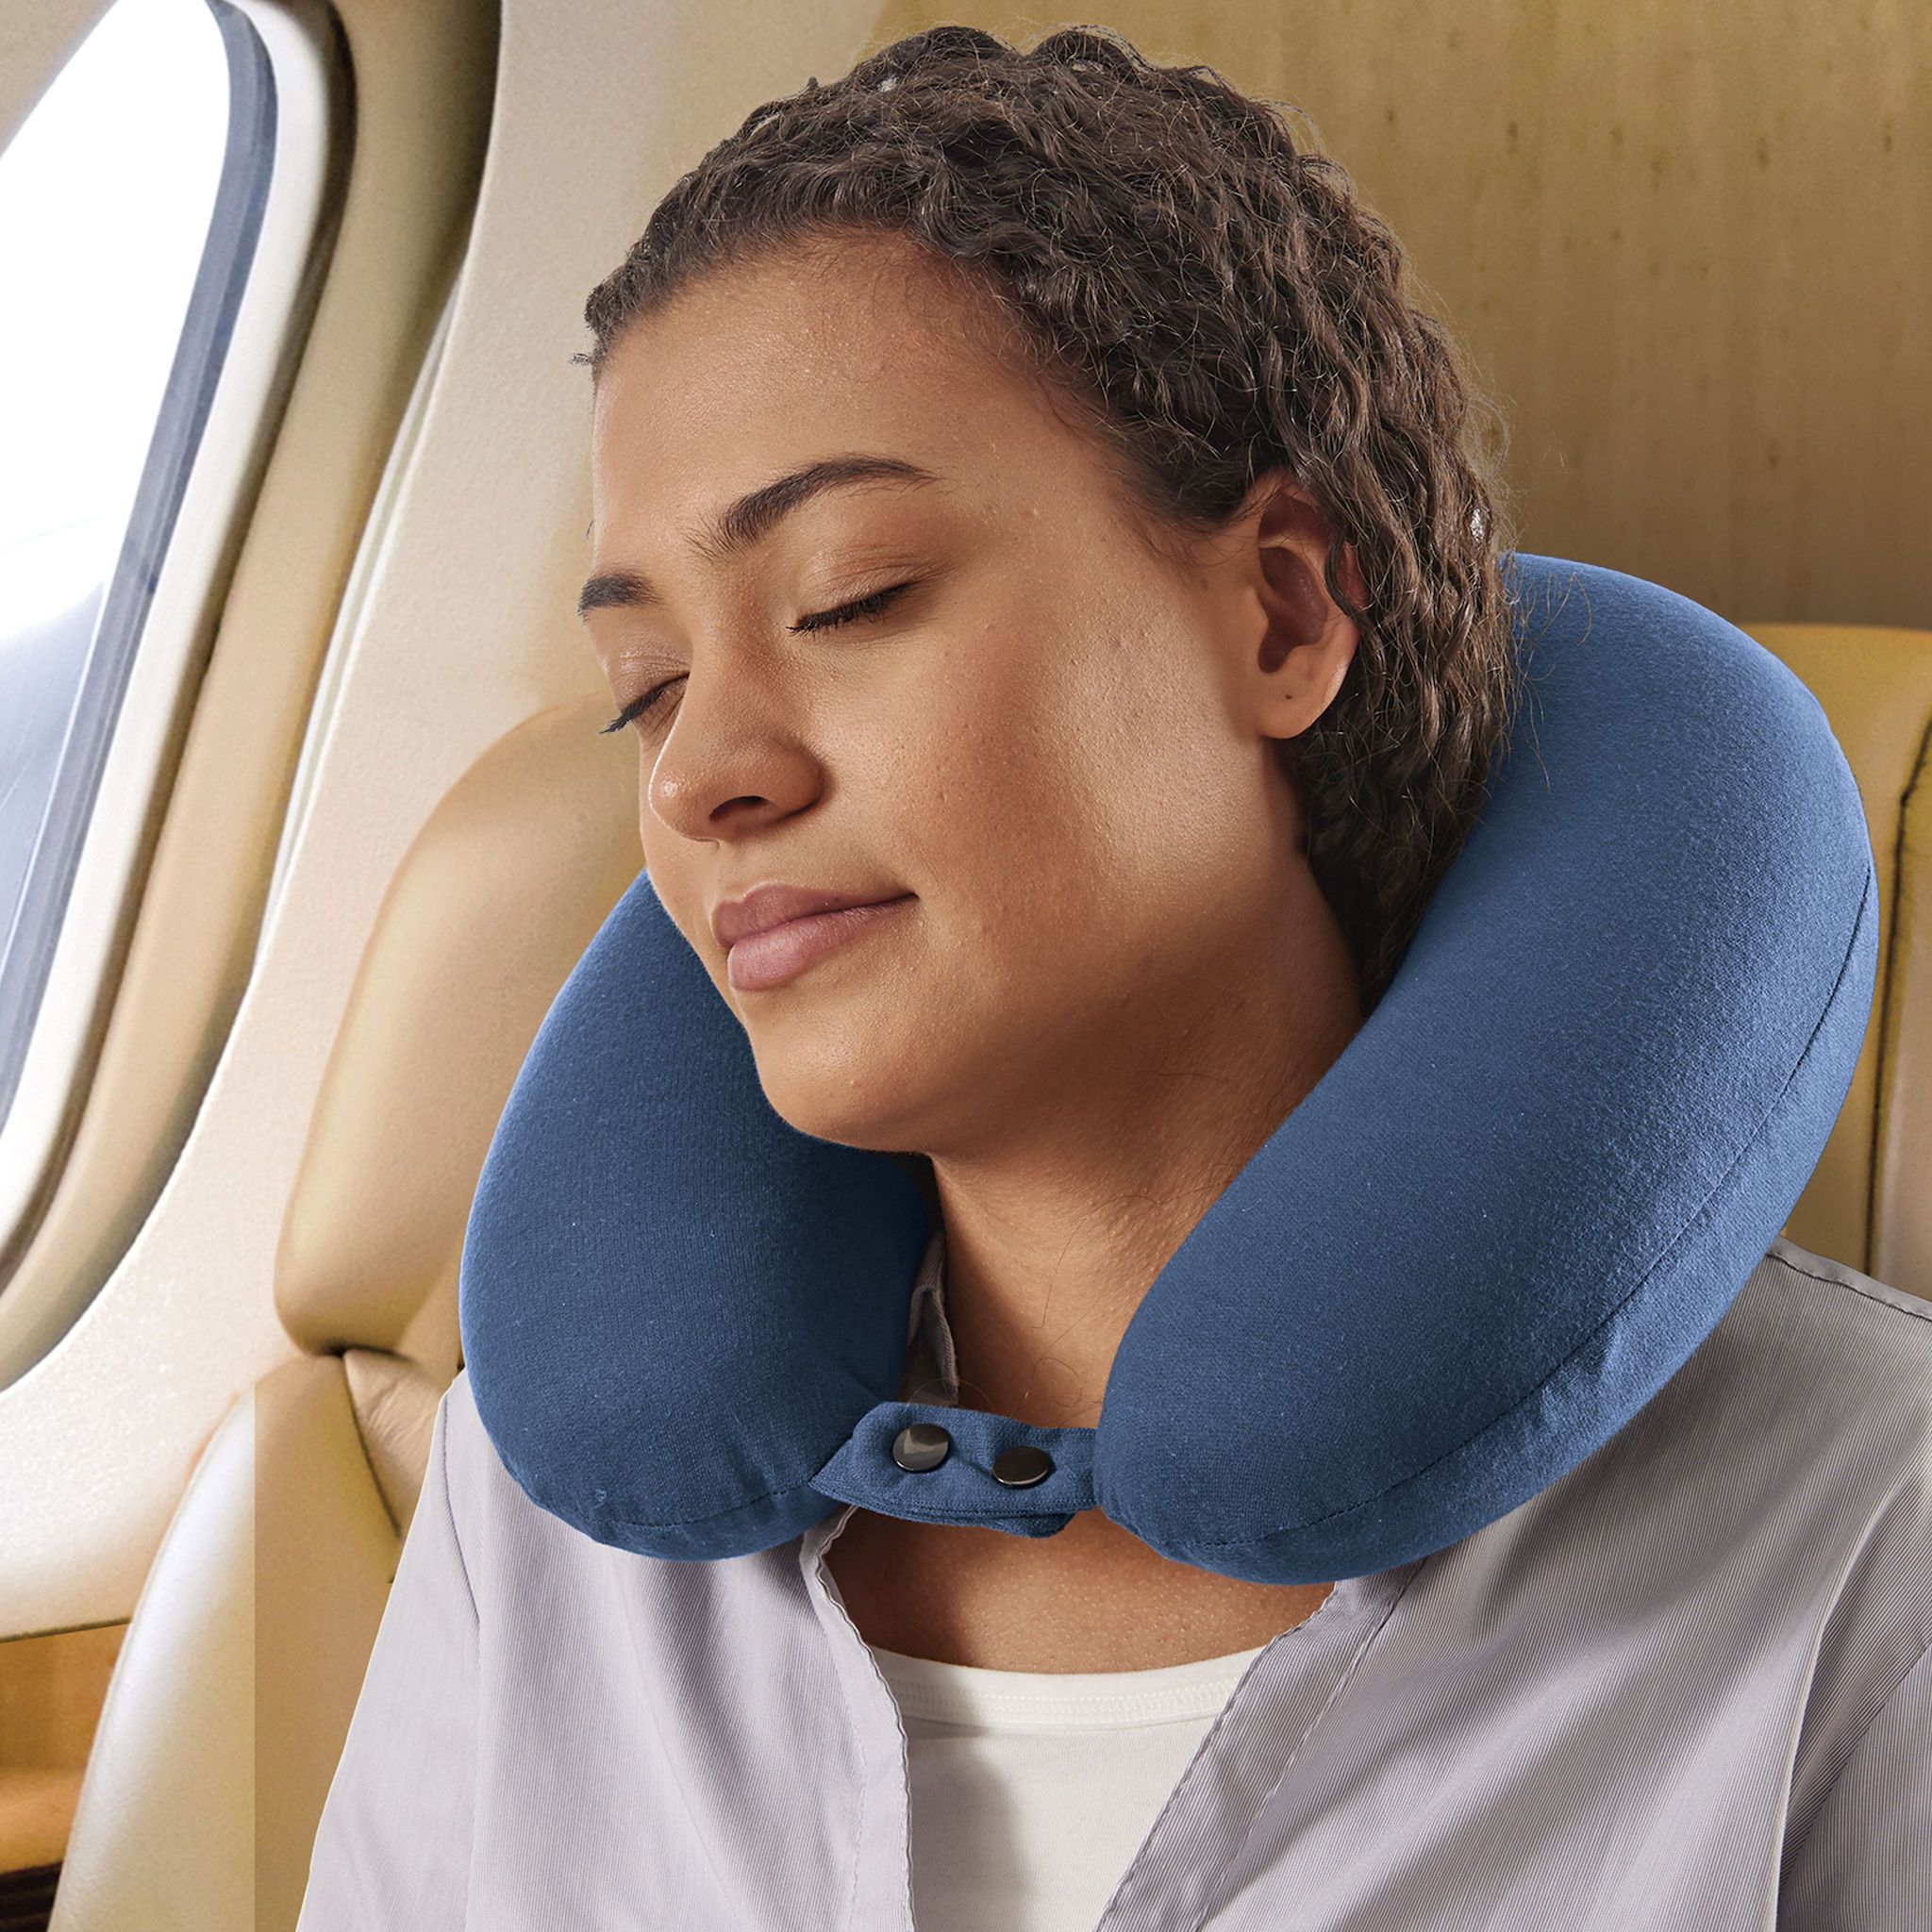 The Book Seat - Book Holder and Travel Pillow - Blue